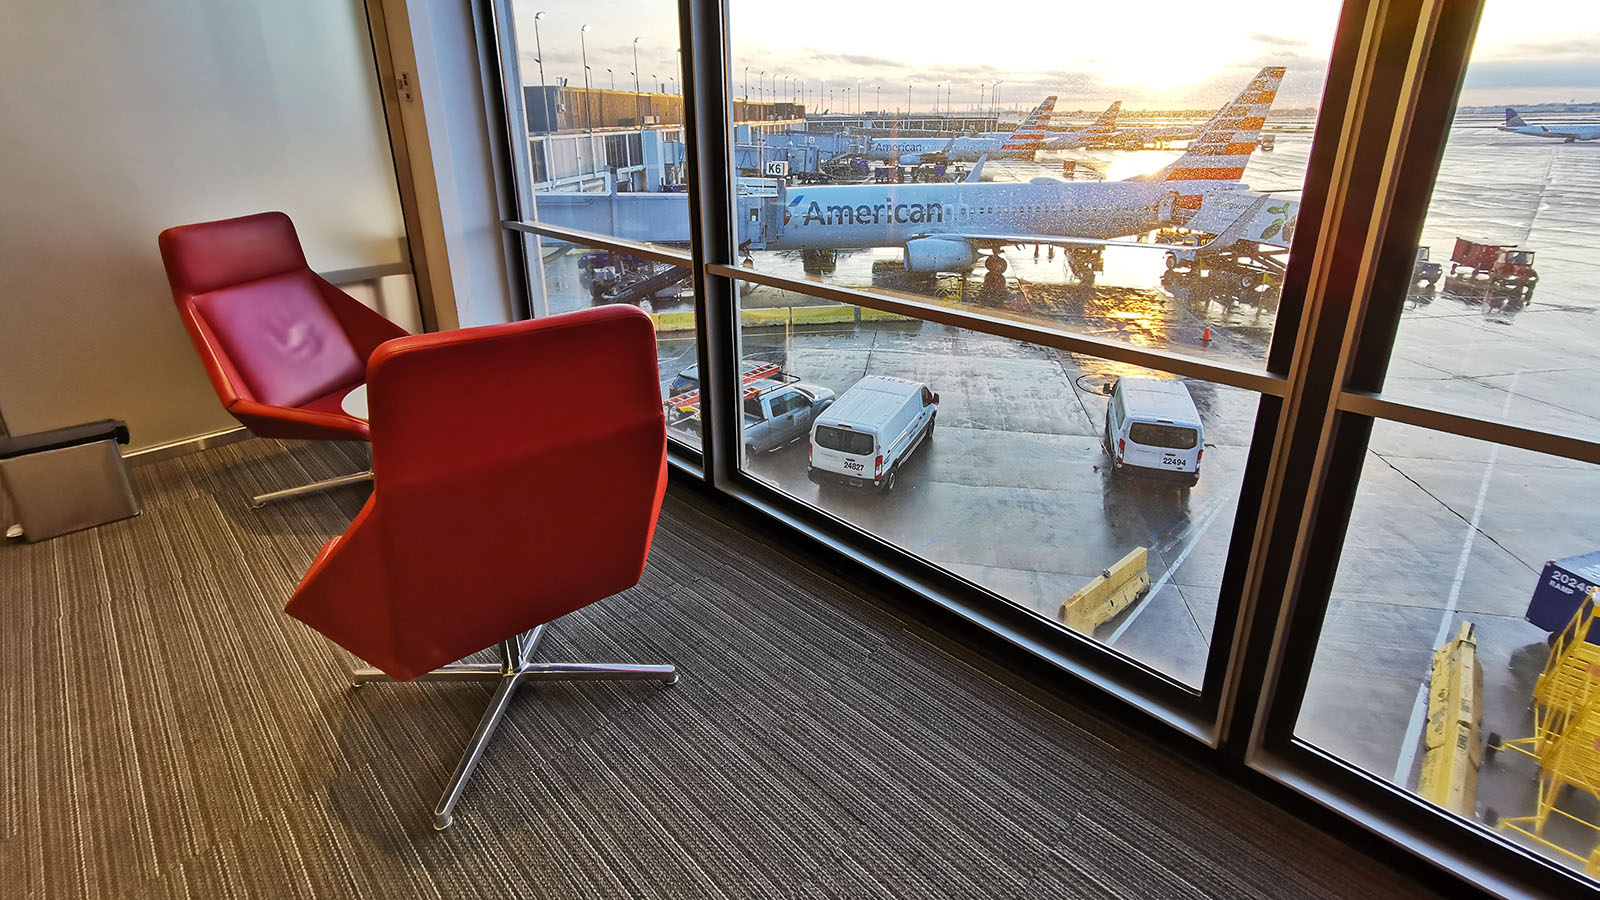 Seats by the window at AA's Flagship Lounge in Chicago